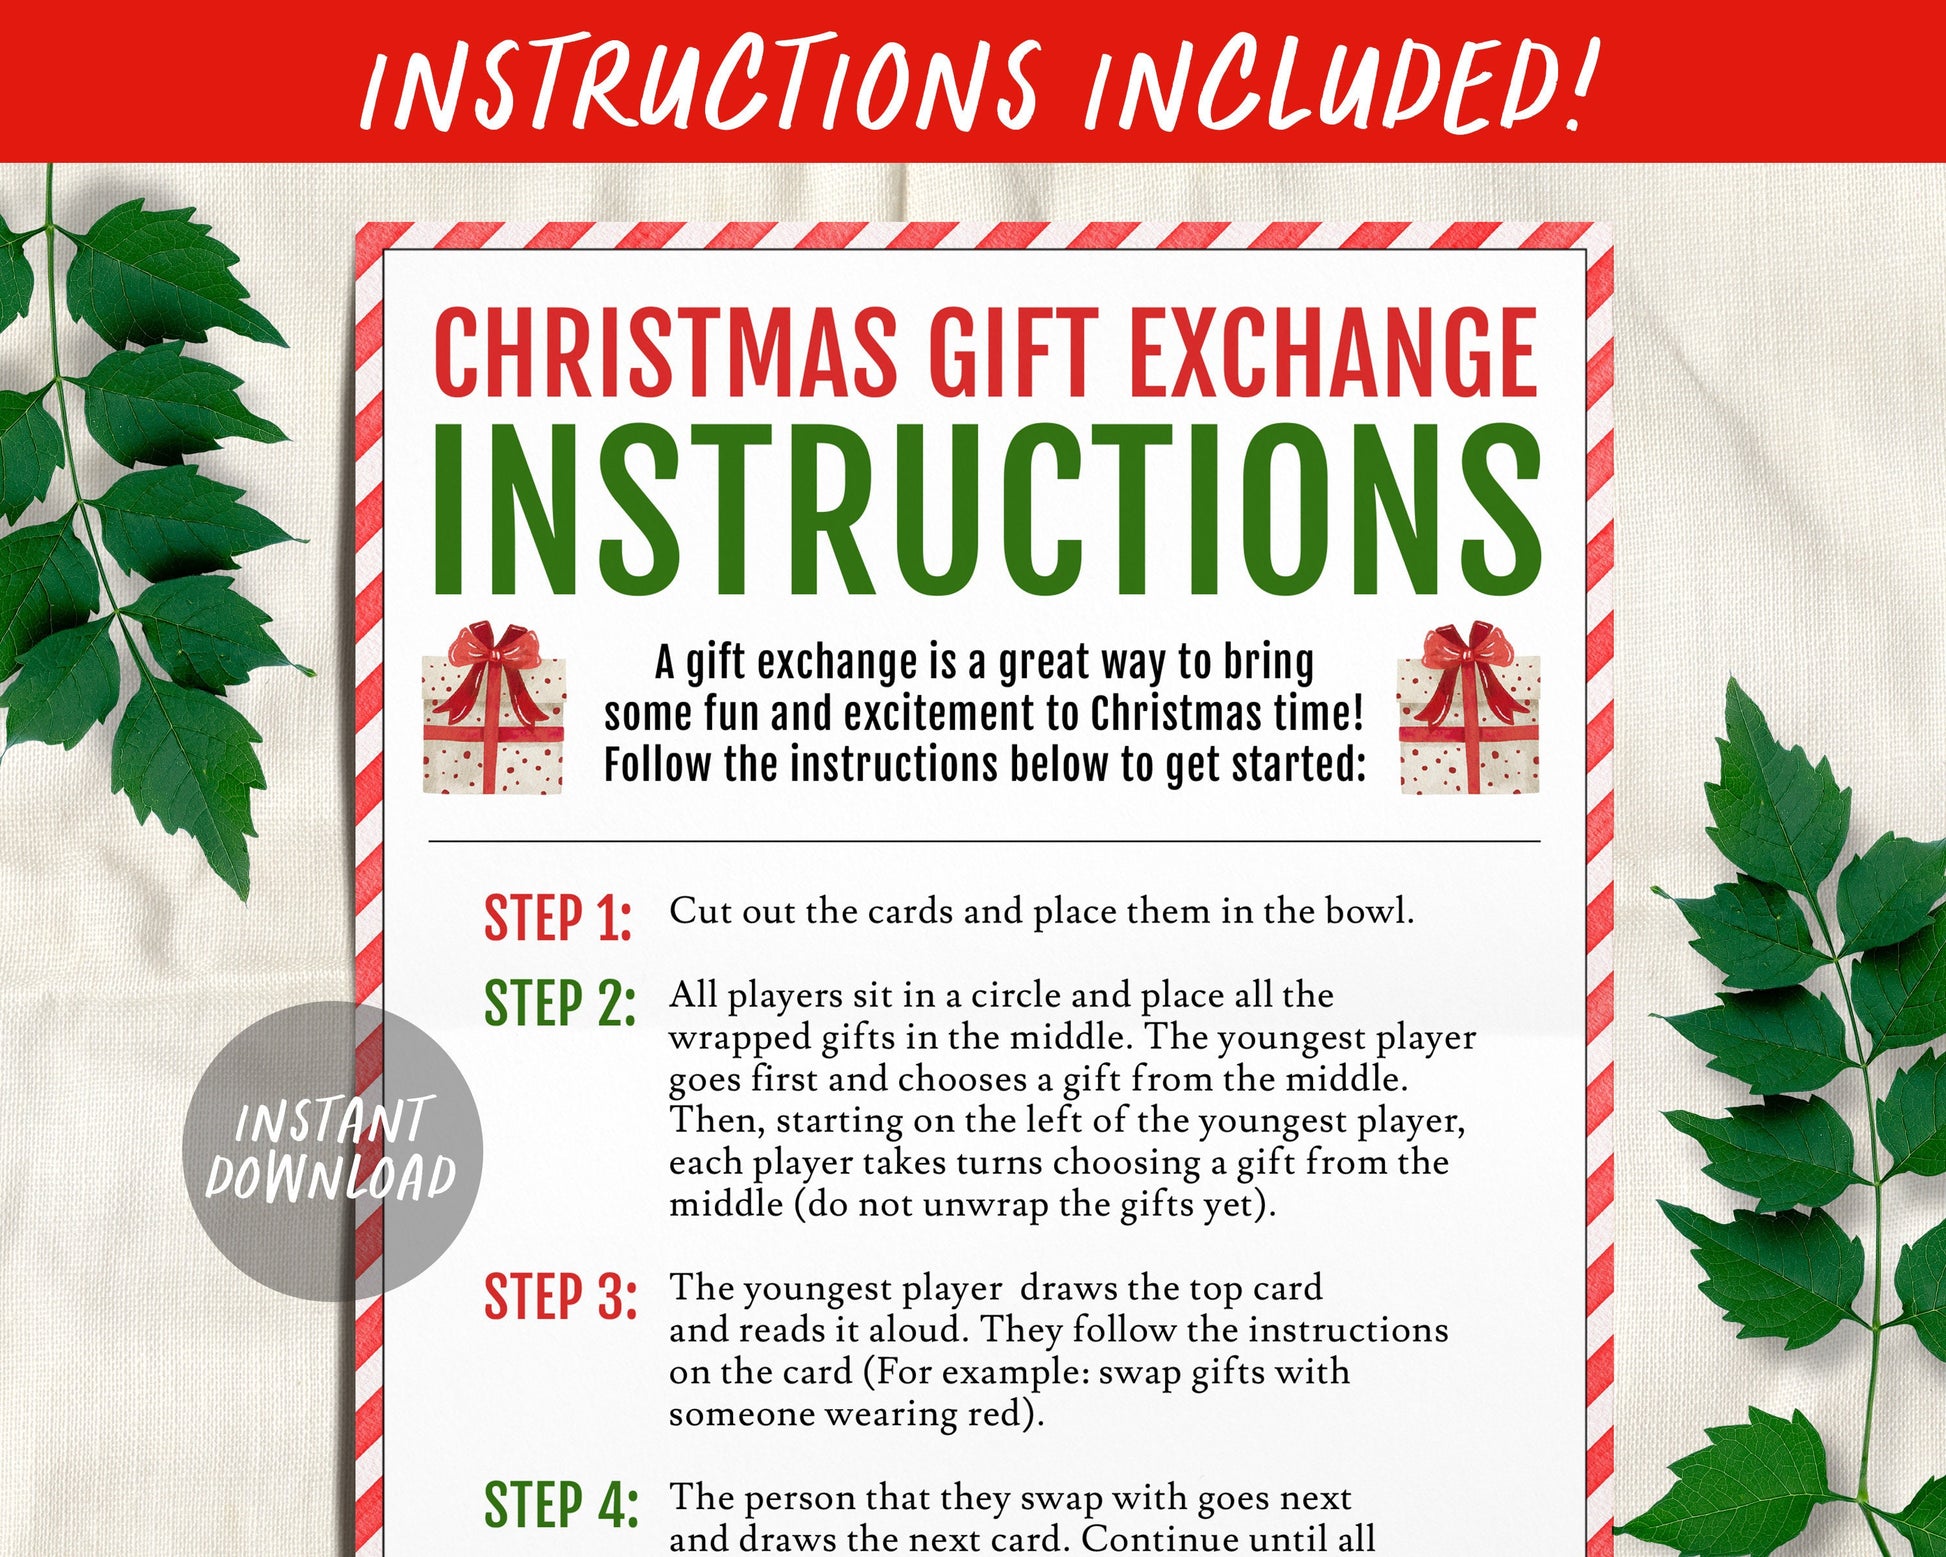 Free Printable Exchange Cards for The Best Holiday Gift Exchange